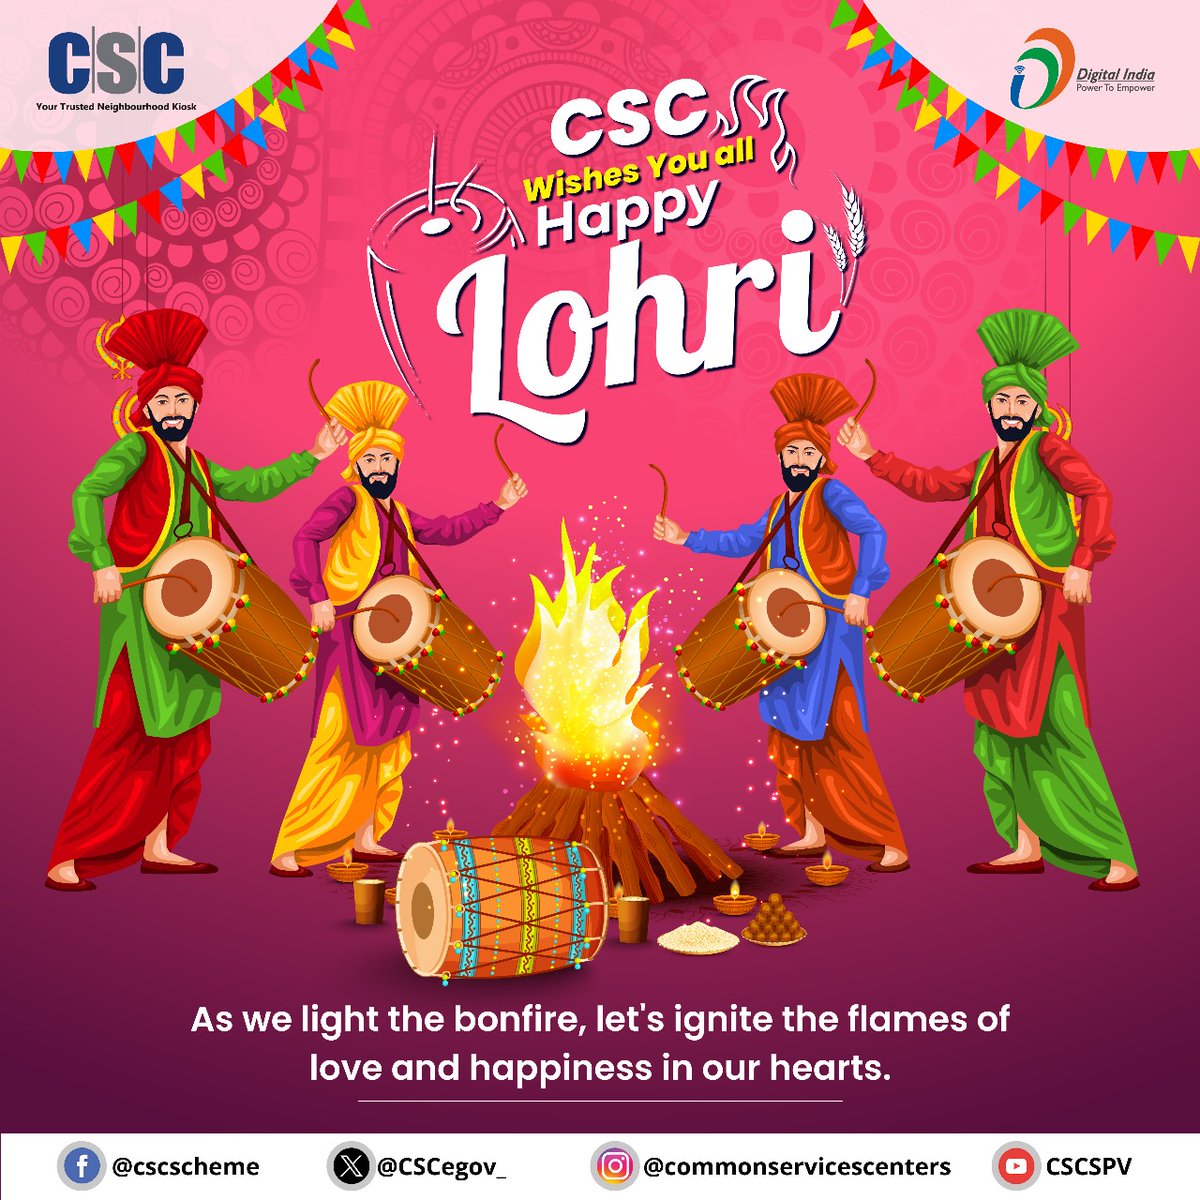 May the Lohri fire burn away negativity and pave the way for a year filled with blessings, success, and good health.

#CSC wishes you all a Happy Lohri!

#DigitalIndia #HappyLohri #HappyLohri2024 #Lohri #LohriFestival #Lohri2024 #DigitalInclusion #RuralEmpowerment #lohriwishes